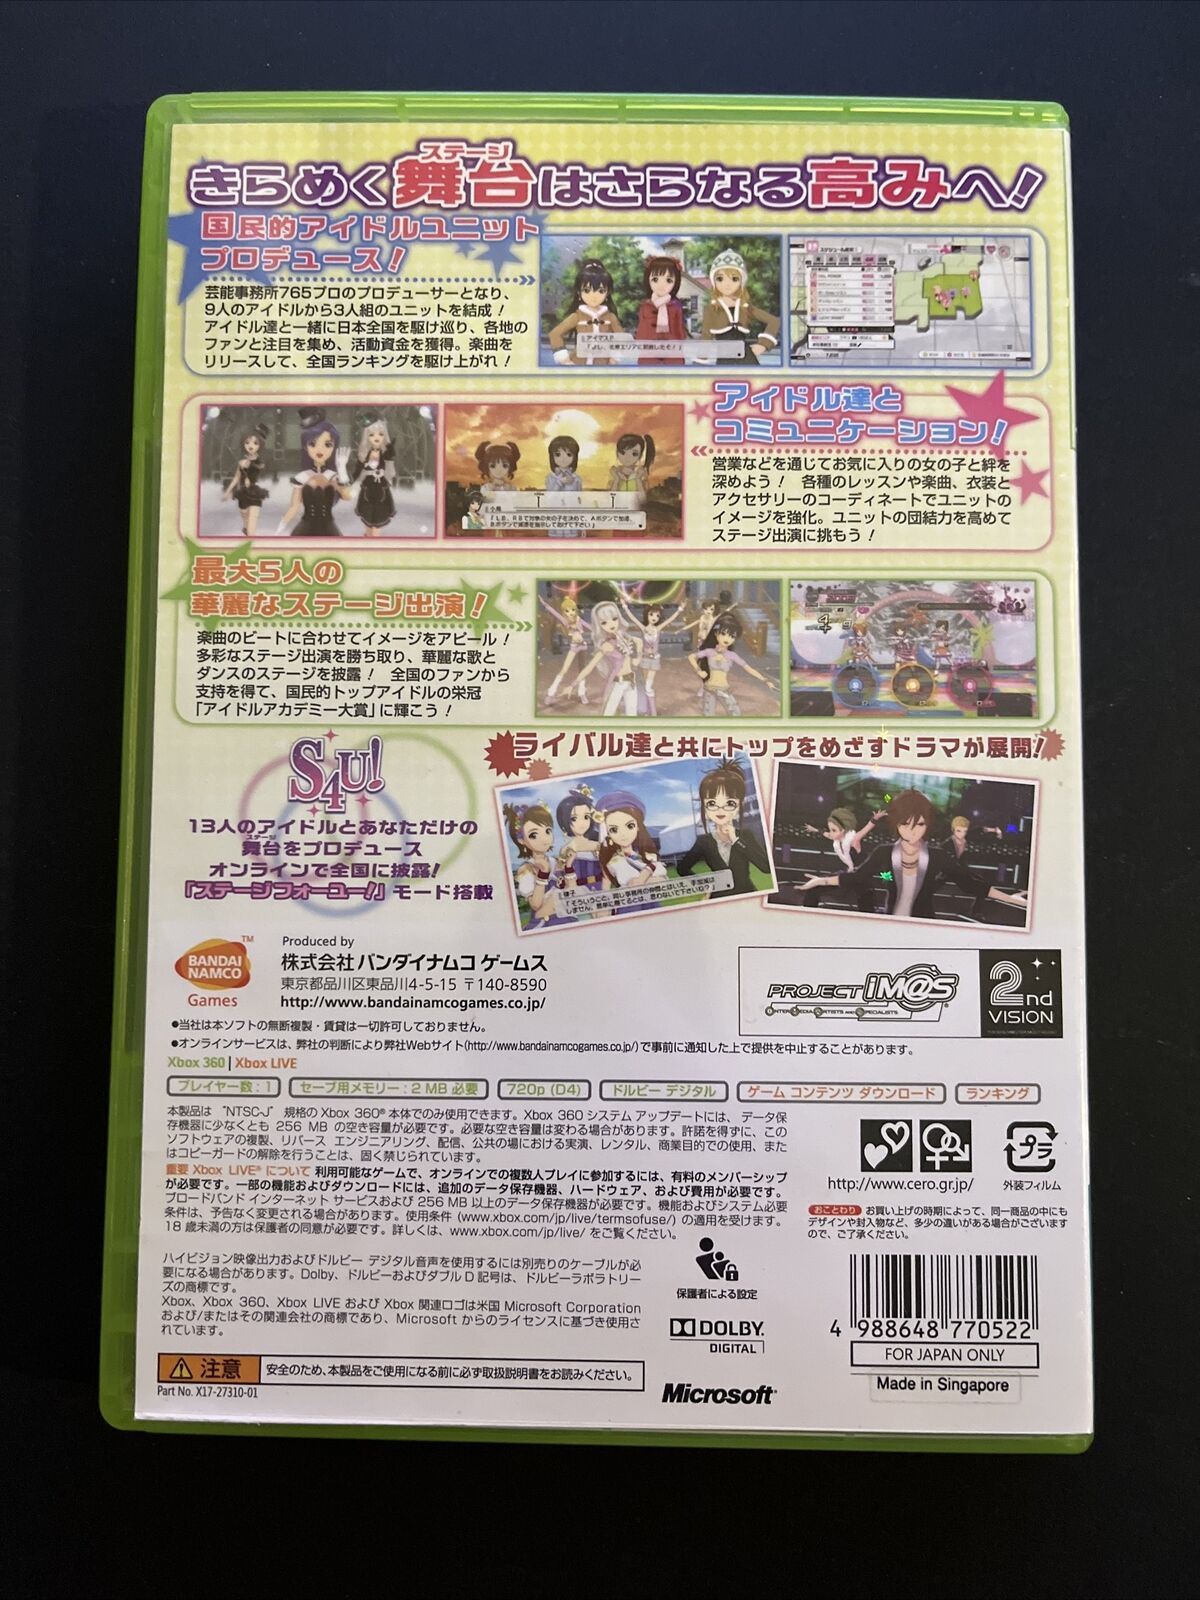 The Idol Master 2 - Microsoft XBOX 360 NTSC-J JAPAN Game Complete with Manual